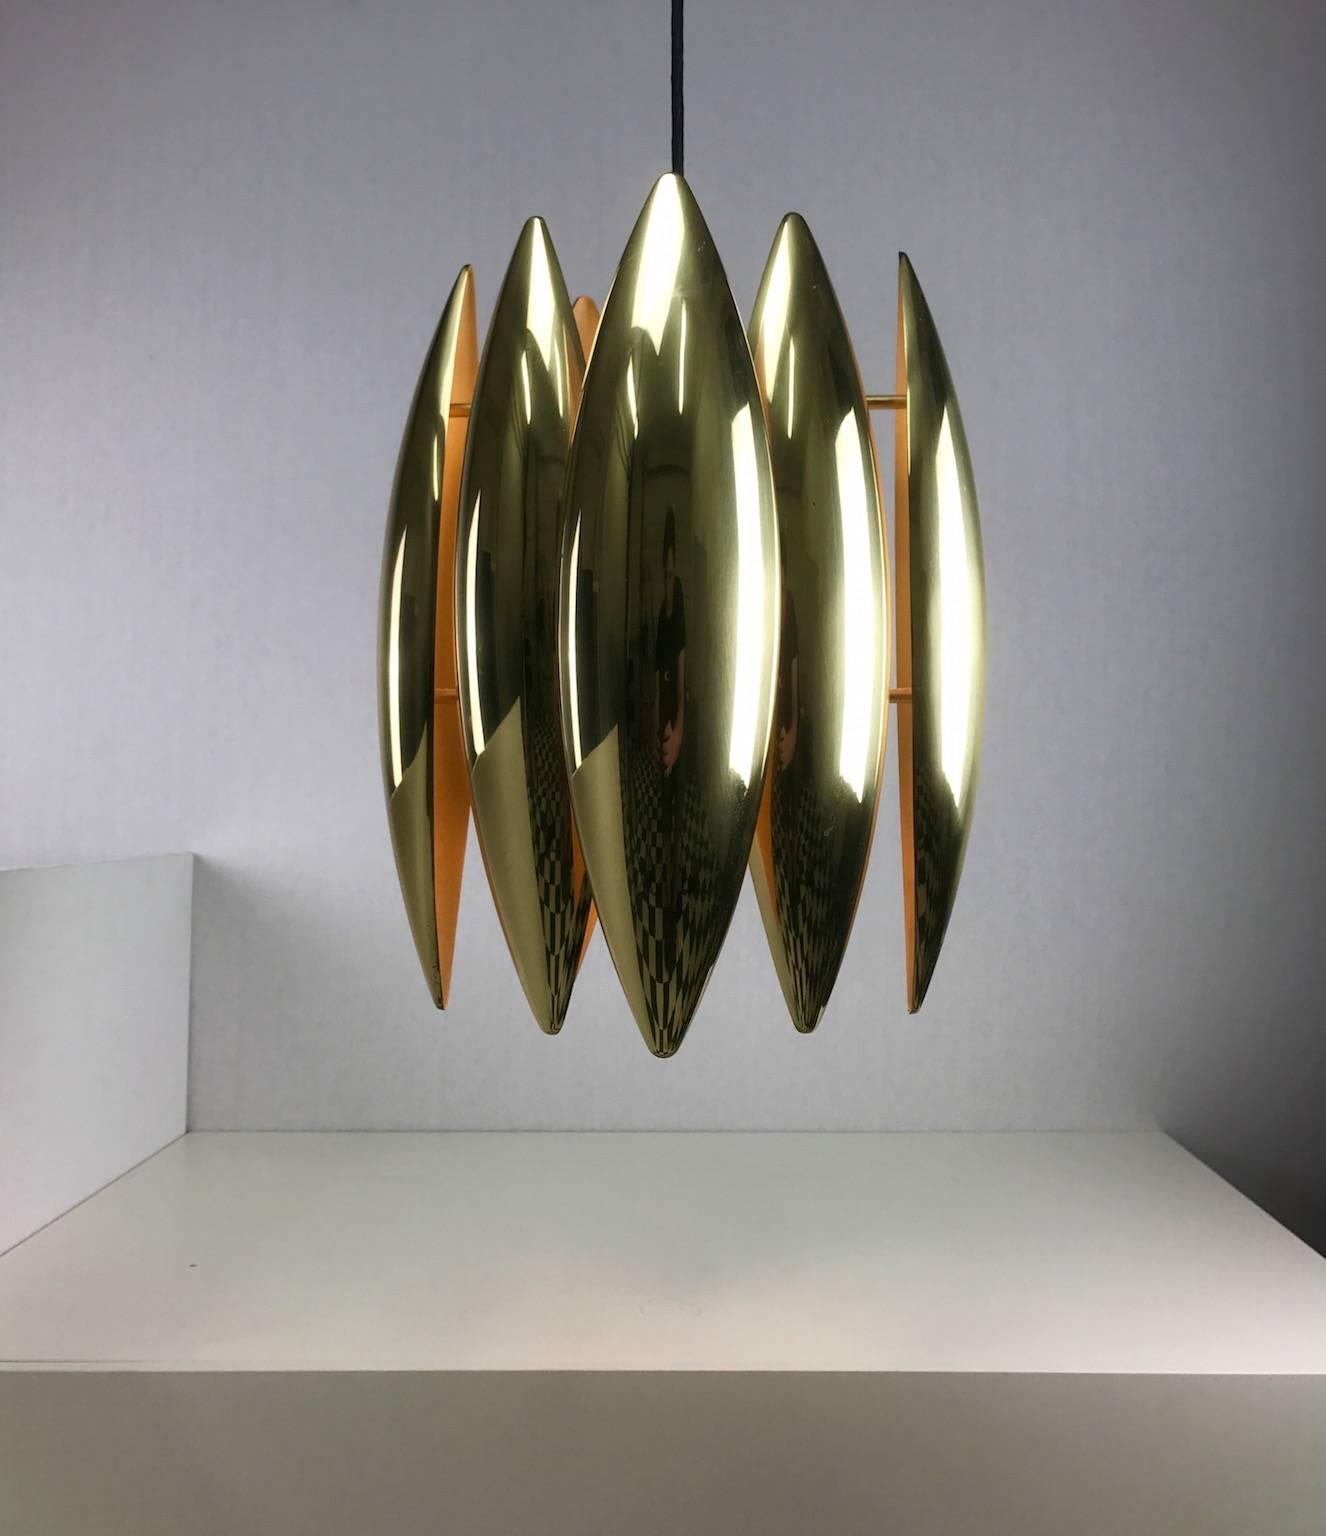 Beautiful brass Kastor ceiling light by Fog & Morup, Denmark, 1969.

Jo Hammerborg designed this amazing piece of danish design which has become one of this decades most iconic lighting fixtures.

Condition: Close to mint condition.

Light